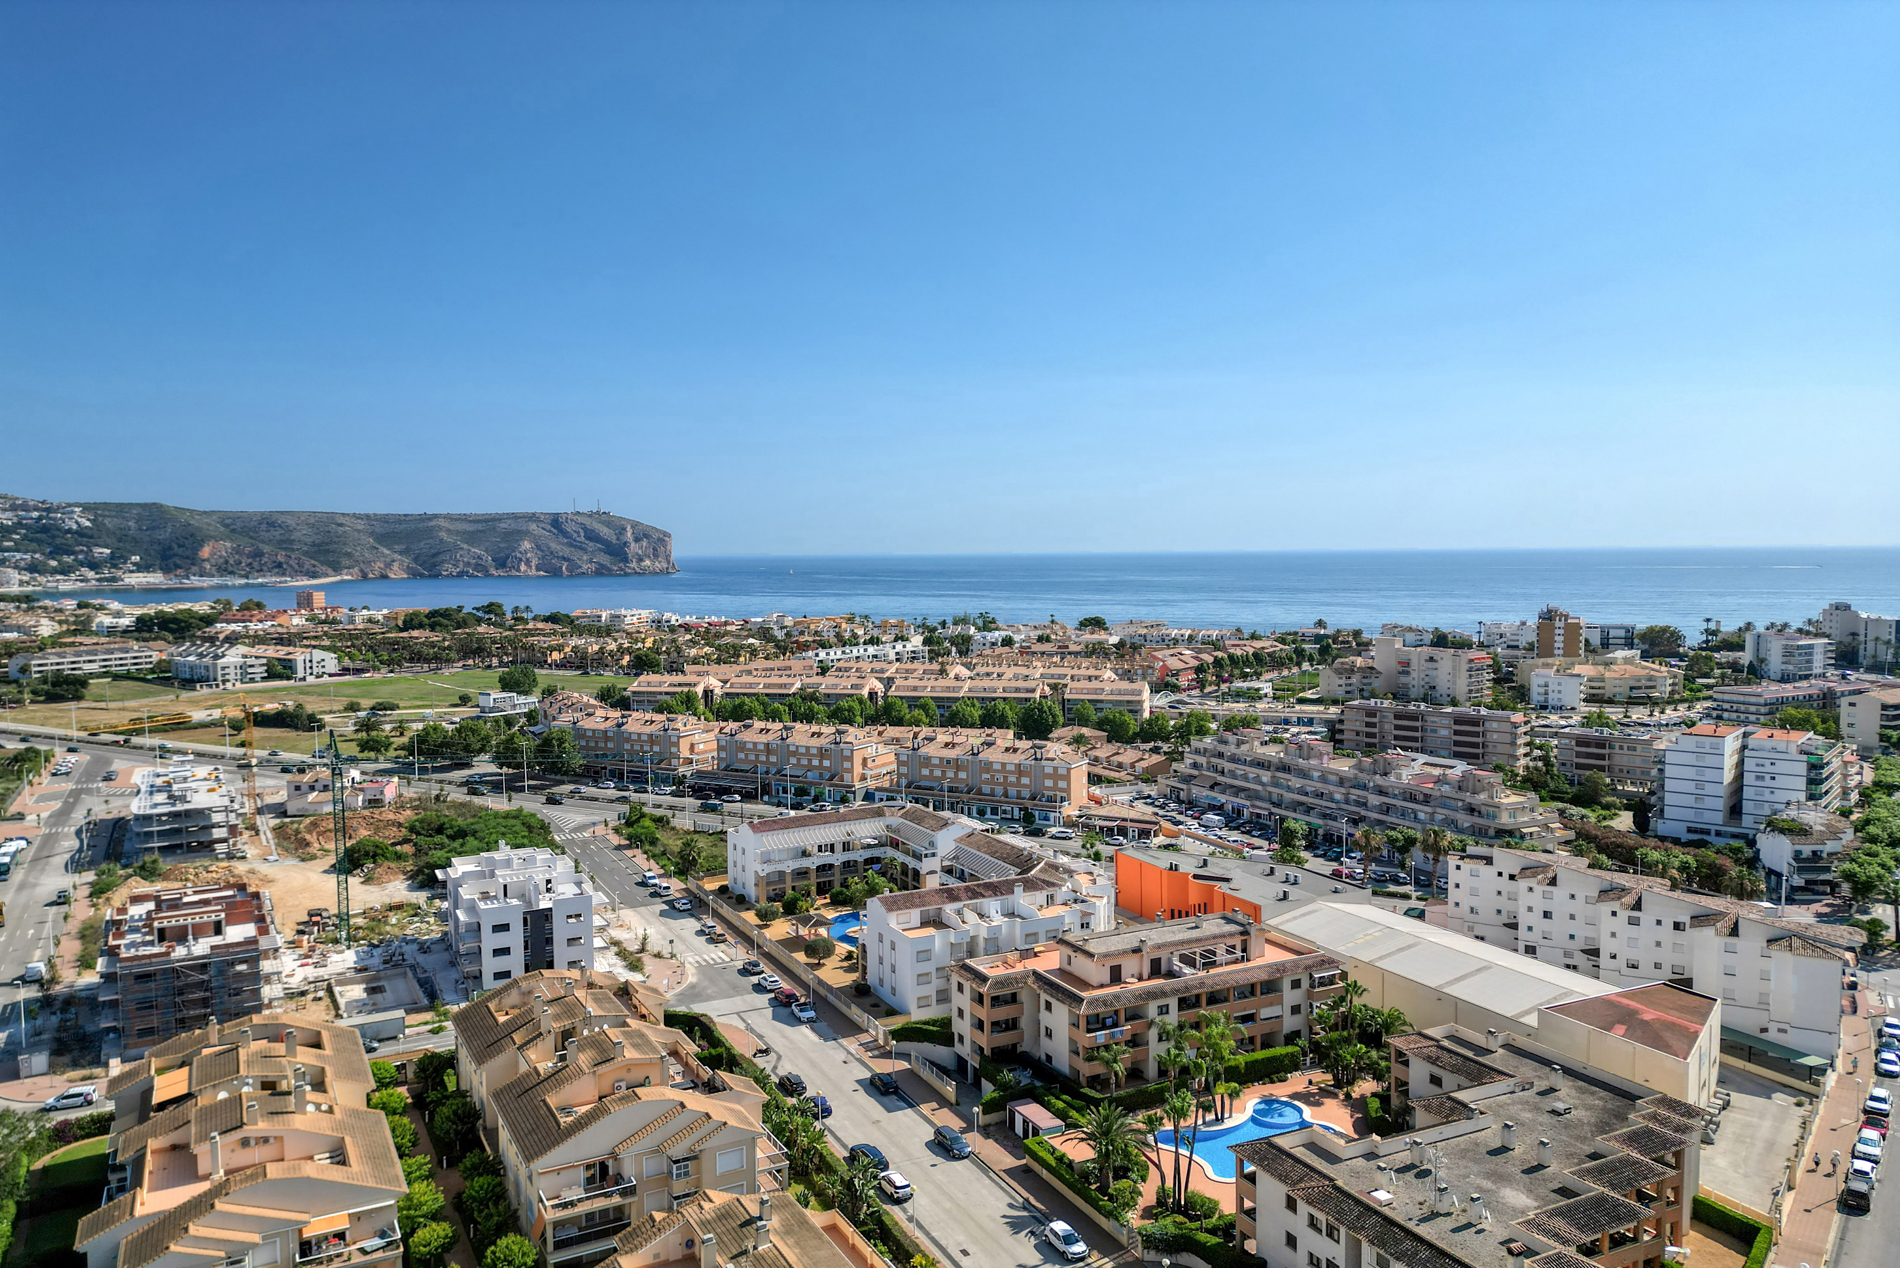 Beautiful 3 Bedroom Penthouse for Sale in Javea near Arenal Beach